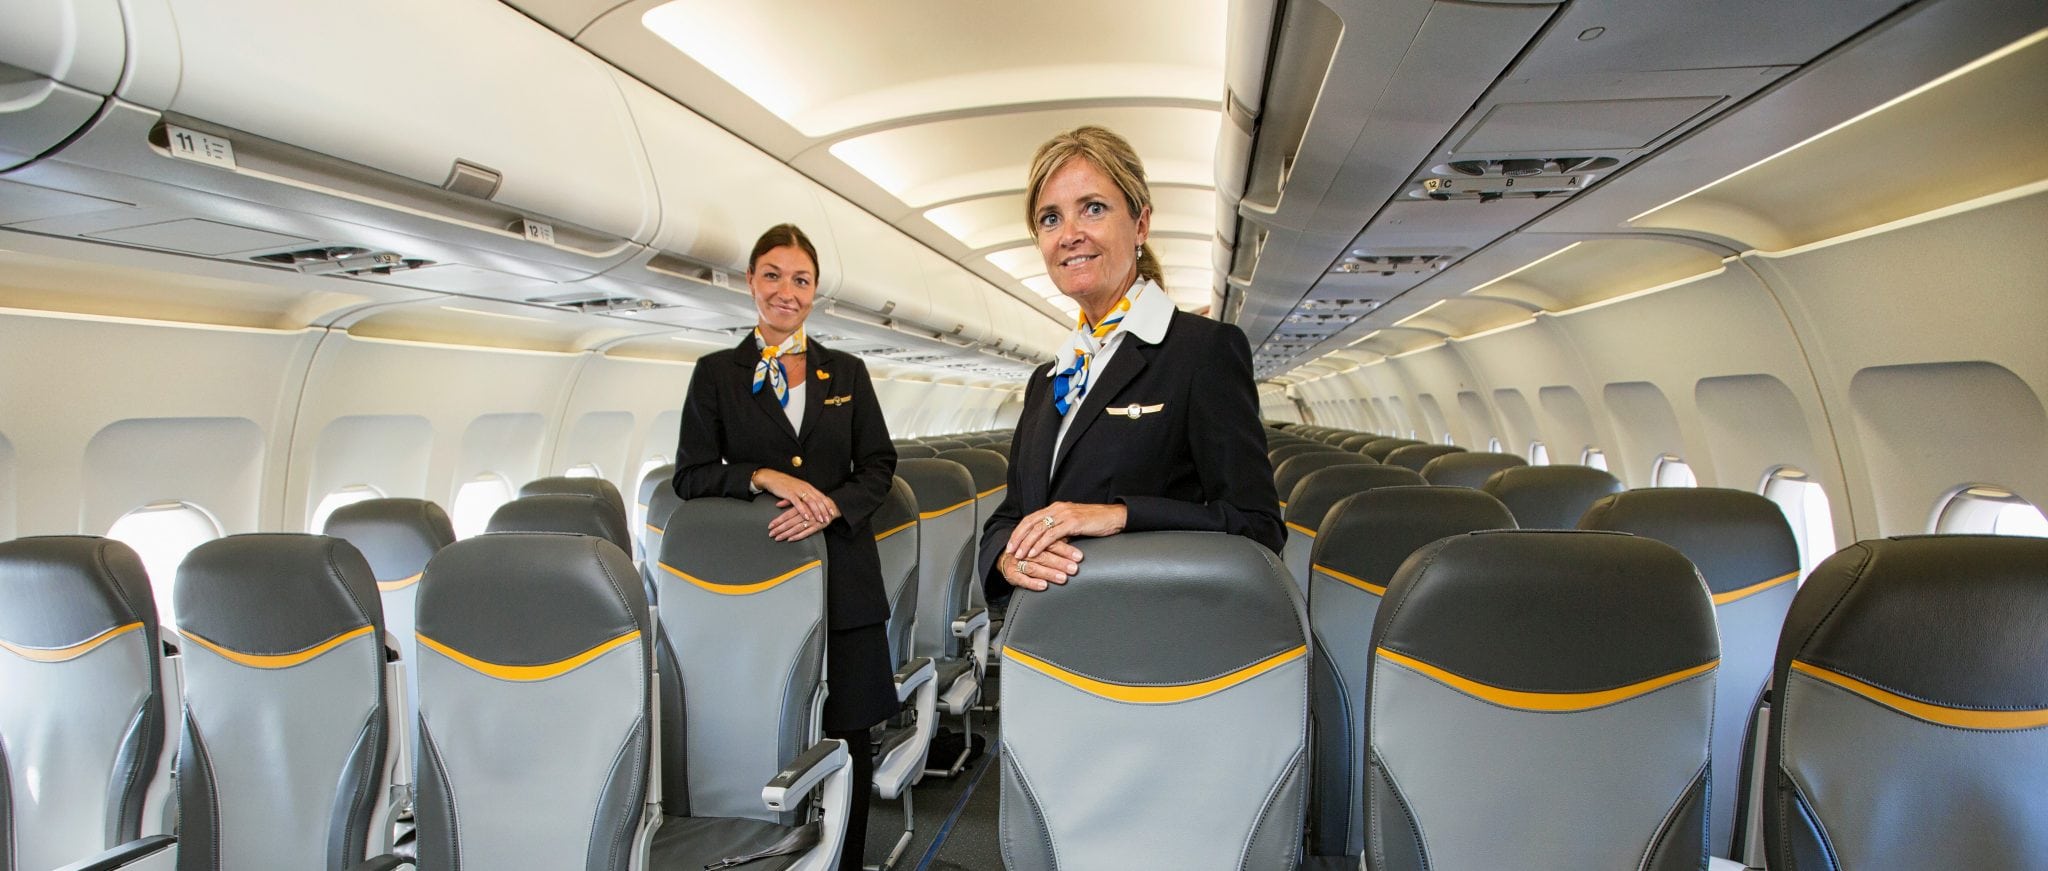 Thomas Cook introduces new Recaro Seats with extra legroom and IFE in its A321 Cabins.